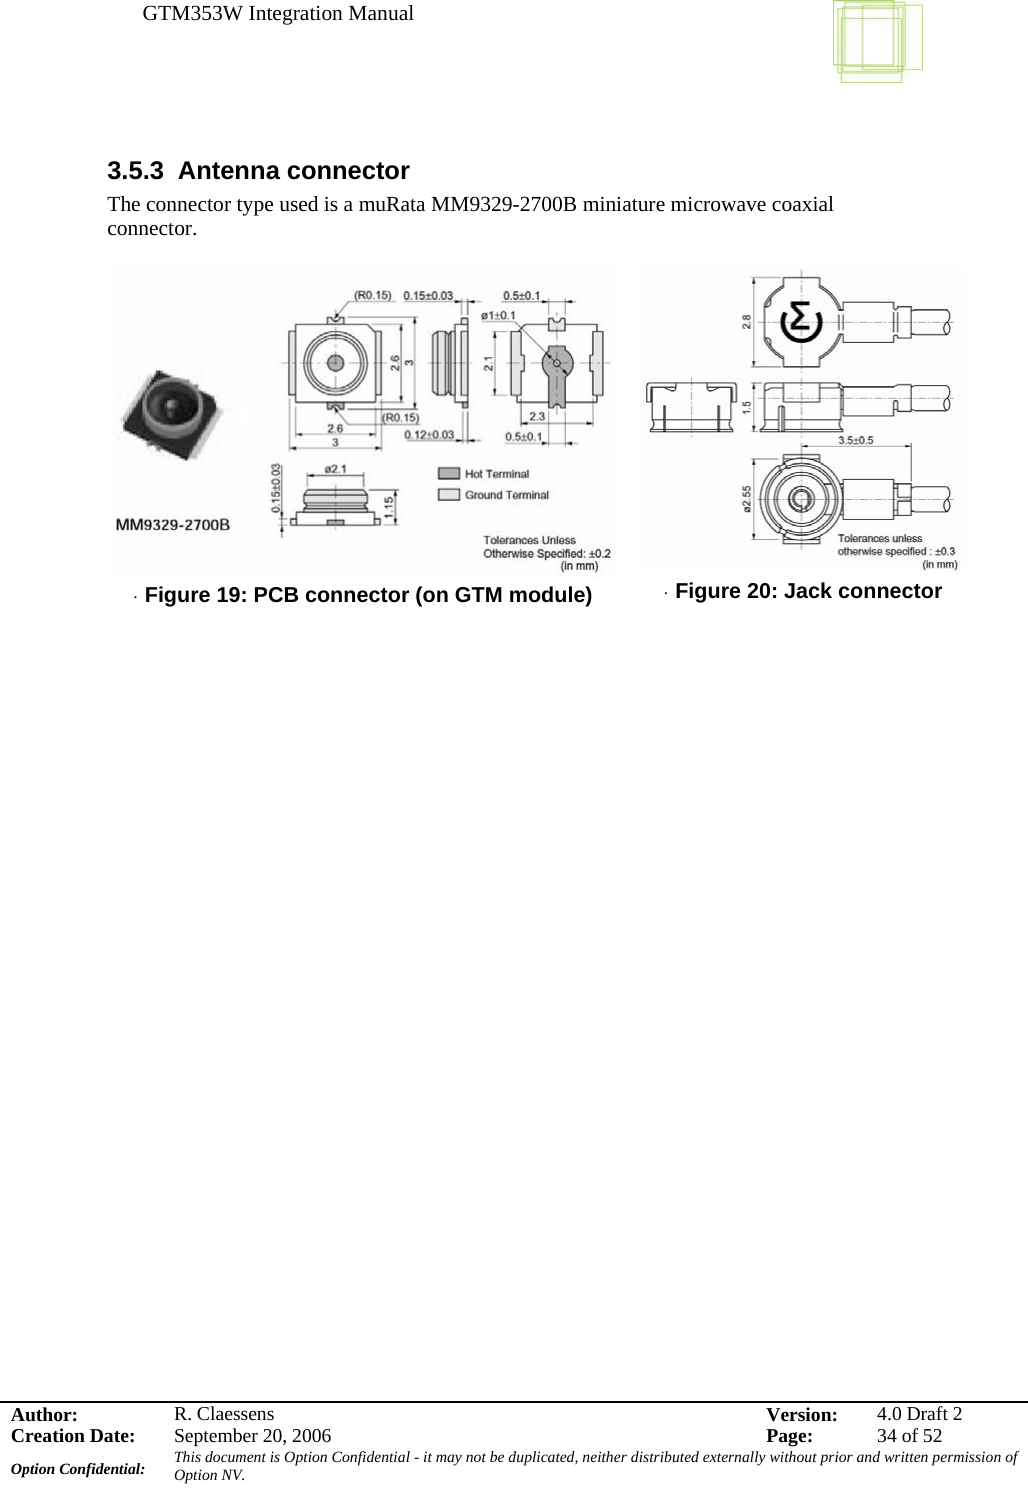 GTM353W Integration Manual      Author: R. Claessens  Version:  4.0 Draft 2Creation Date:  September 20, 2006  Page:  34 of 52 Option Confidential:  This document is Option Confidential - it may not be duplicated, neither distributed externally without prior and written permission of Option NV.    3.5.3 Antenna connector The connector type used is a muRata MM9329-2700B miniature microwave coaxial connector.   · Figure 19: PCB connector (on GTM module)   · Figure 20: Jack connector    